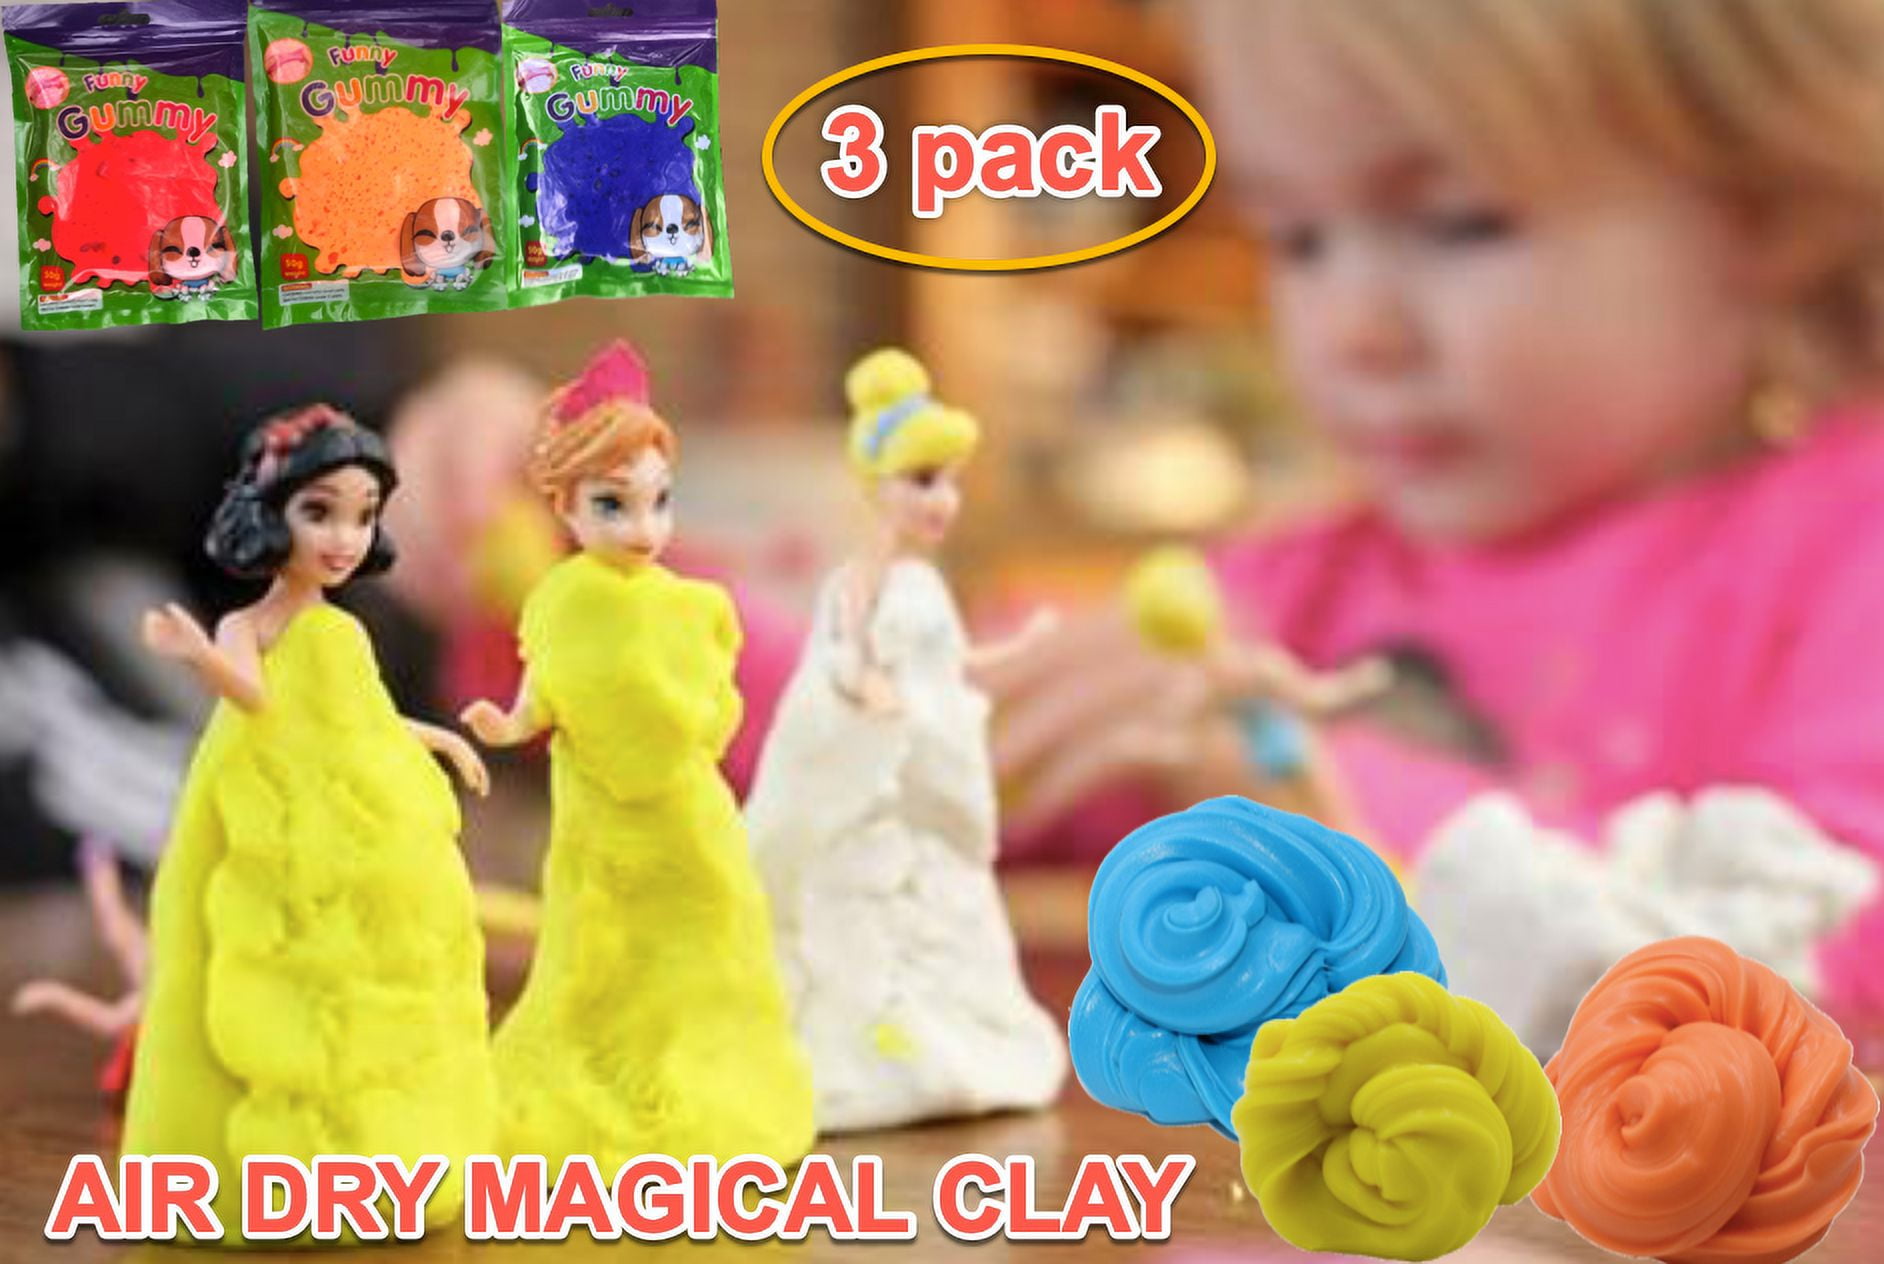 PLASTICINE MINI MODELLING PLAY CLAY GREAT PARTY BAGS FILLERS TOYS GIFTS  KIDS 35g